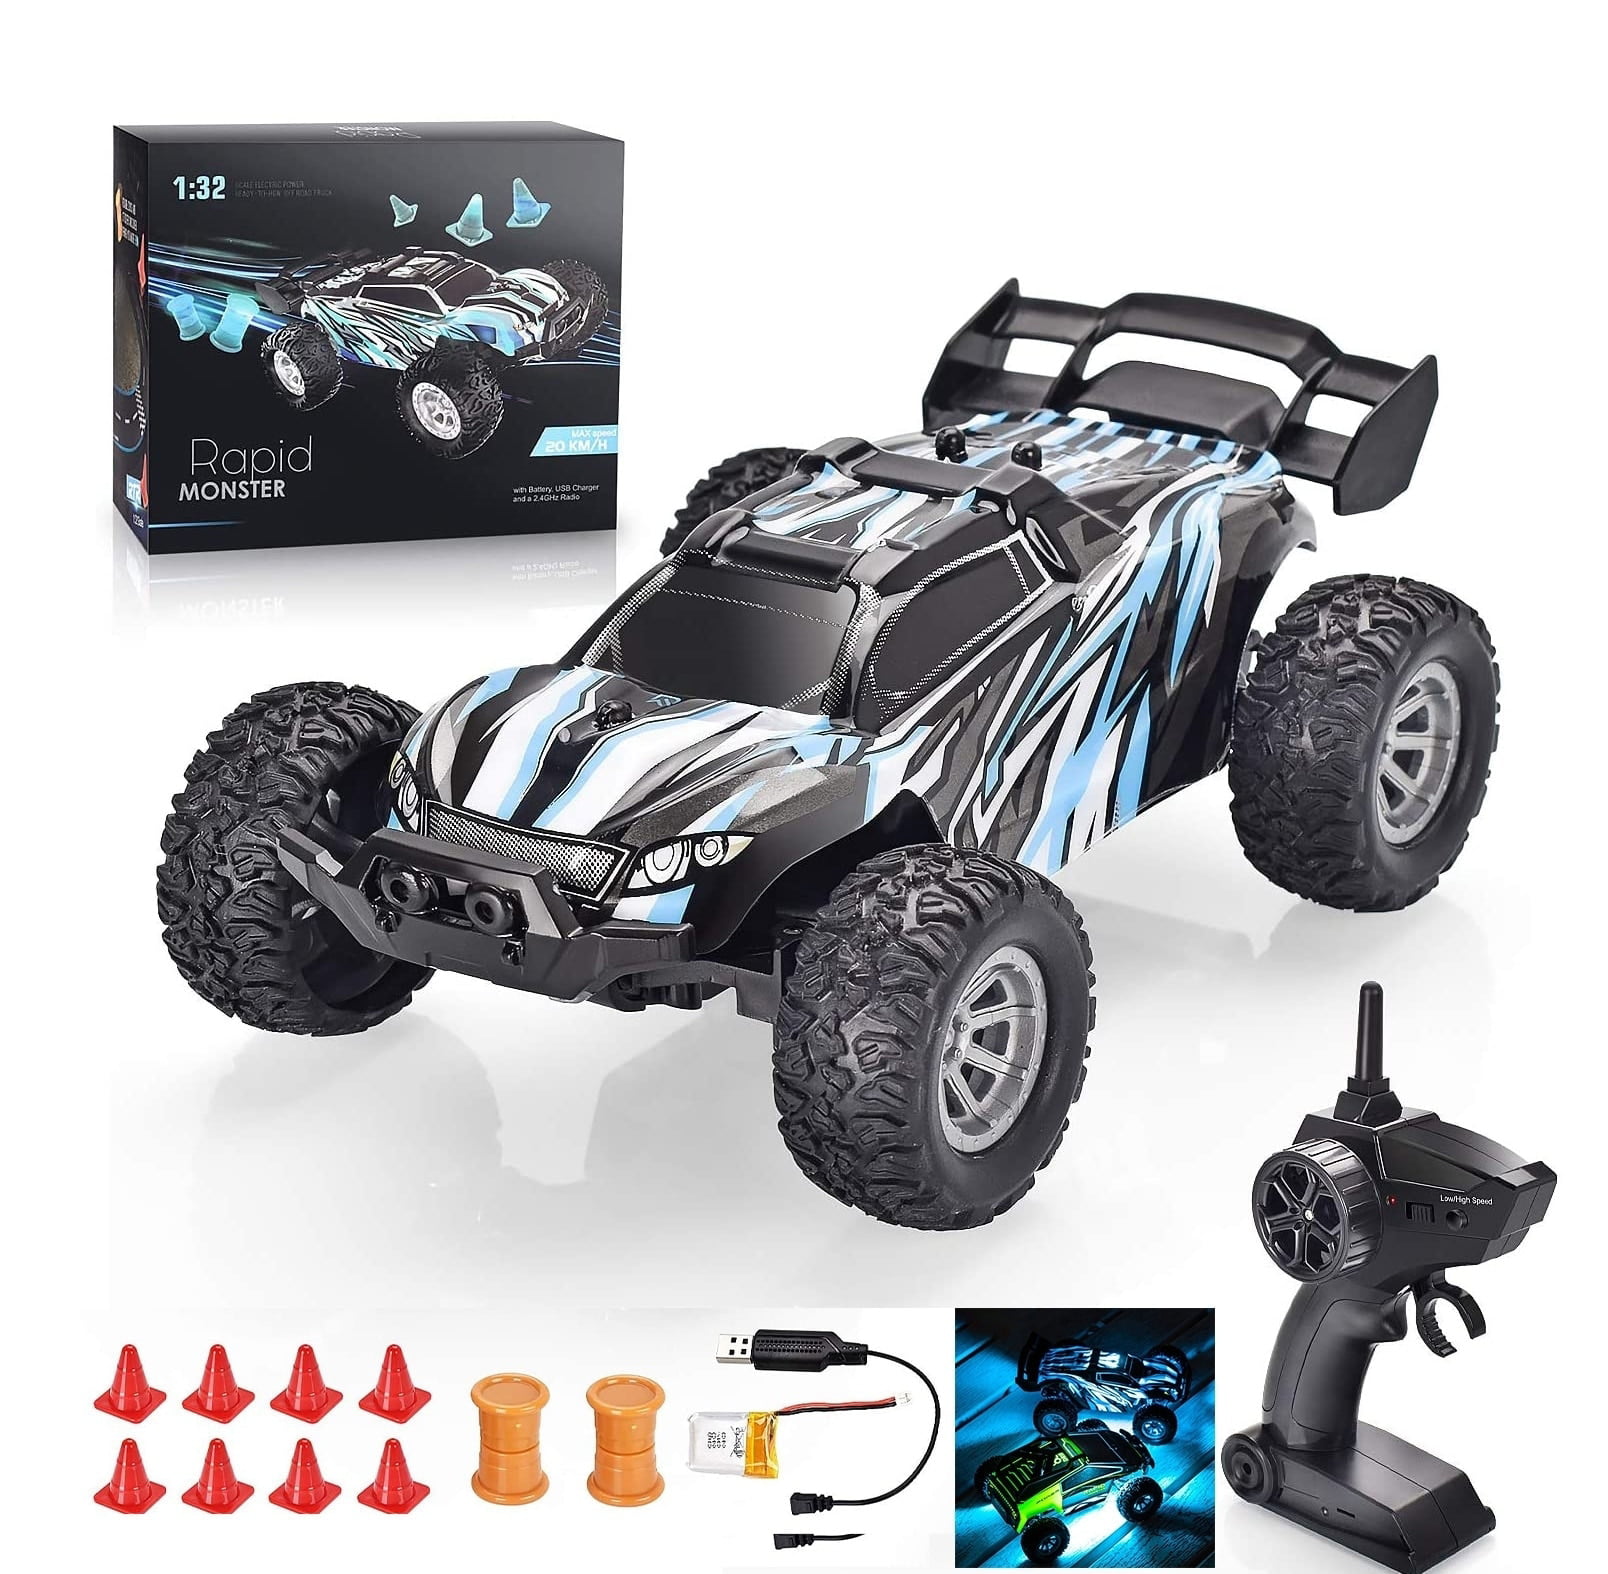 Details about   1:32 Mini High Speed 2WD RC Car 2.4G  Remote Control Car Kids Toy